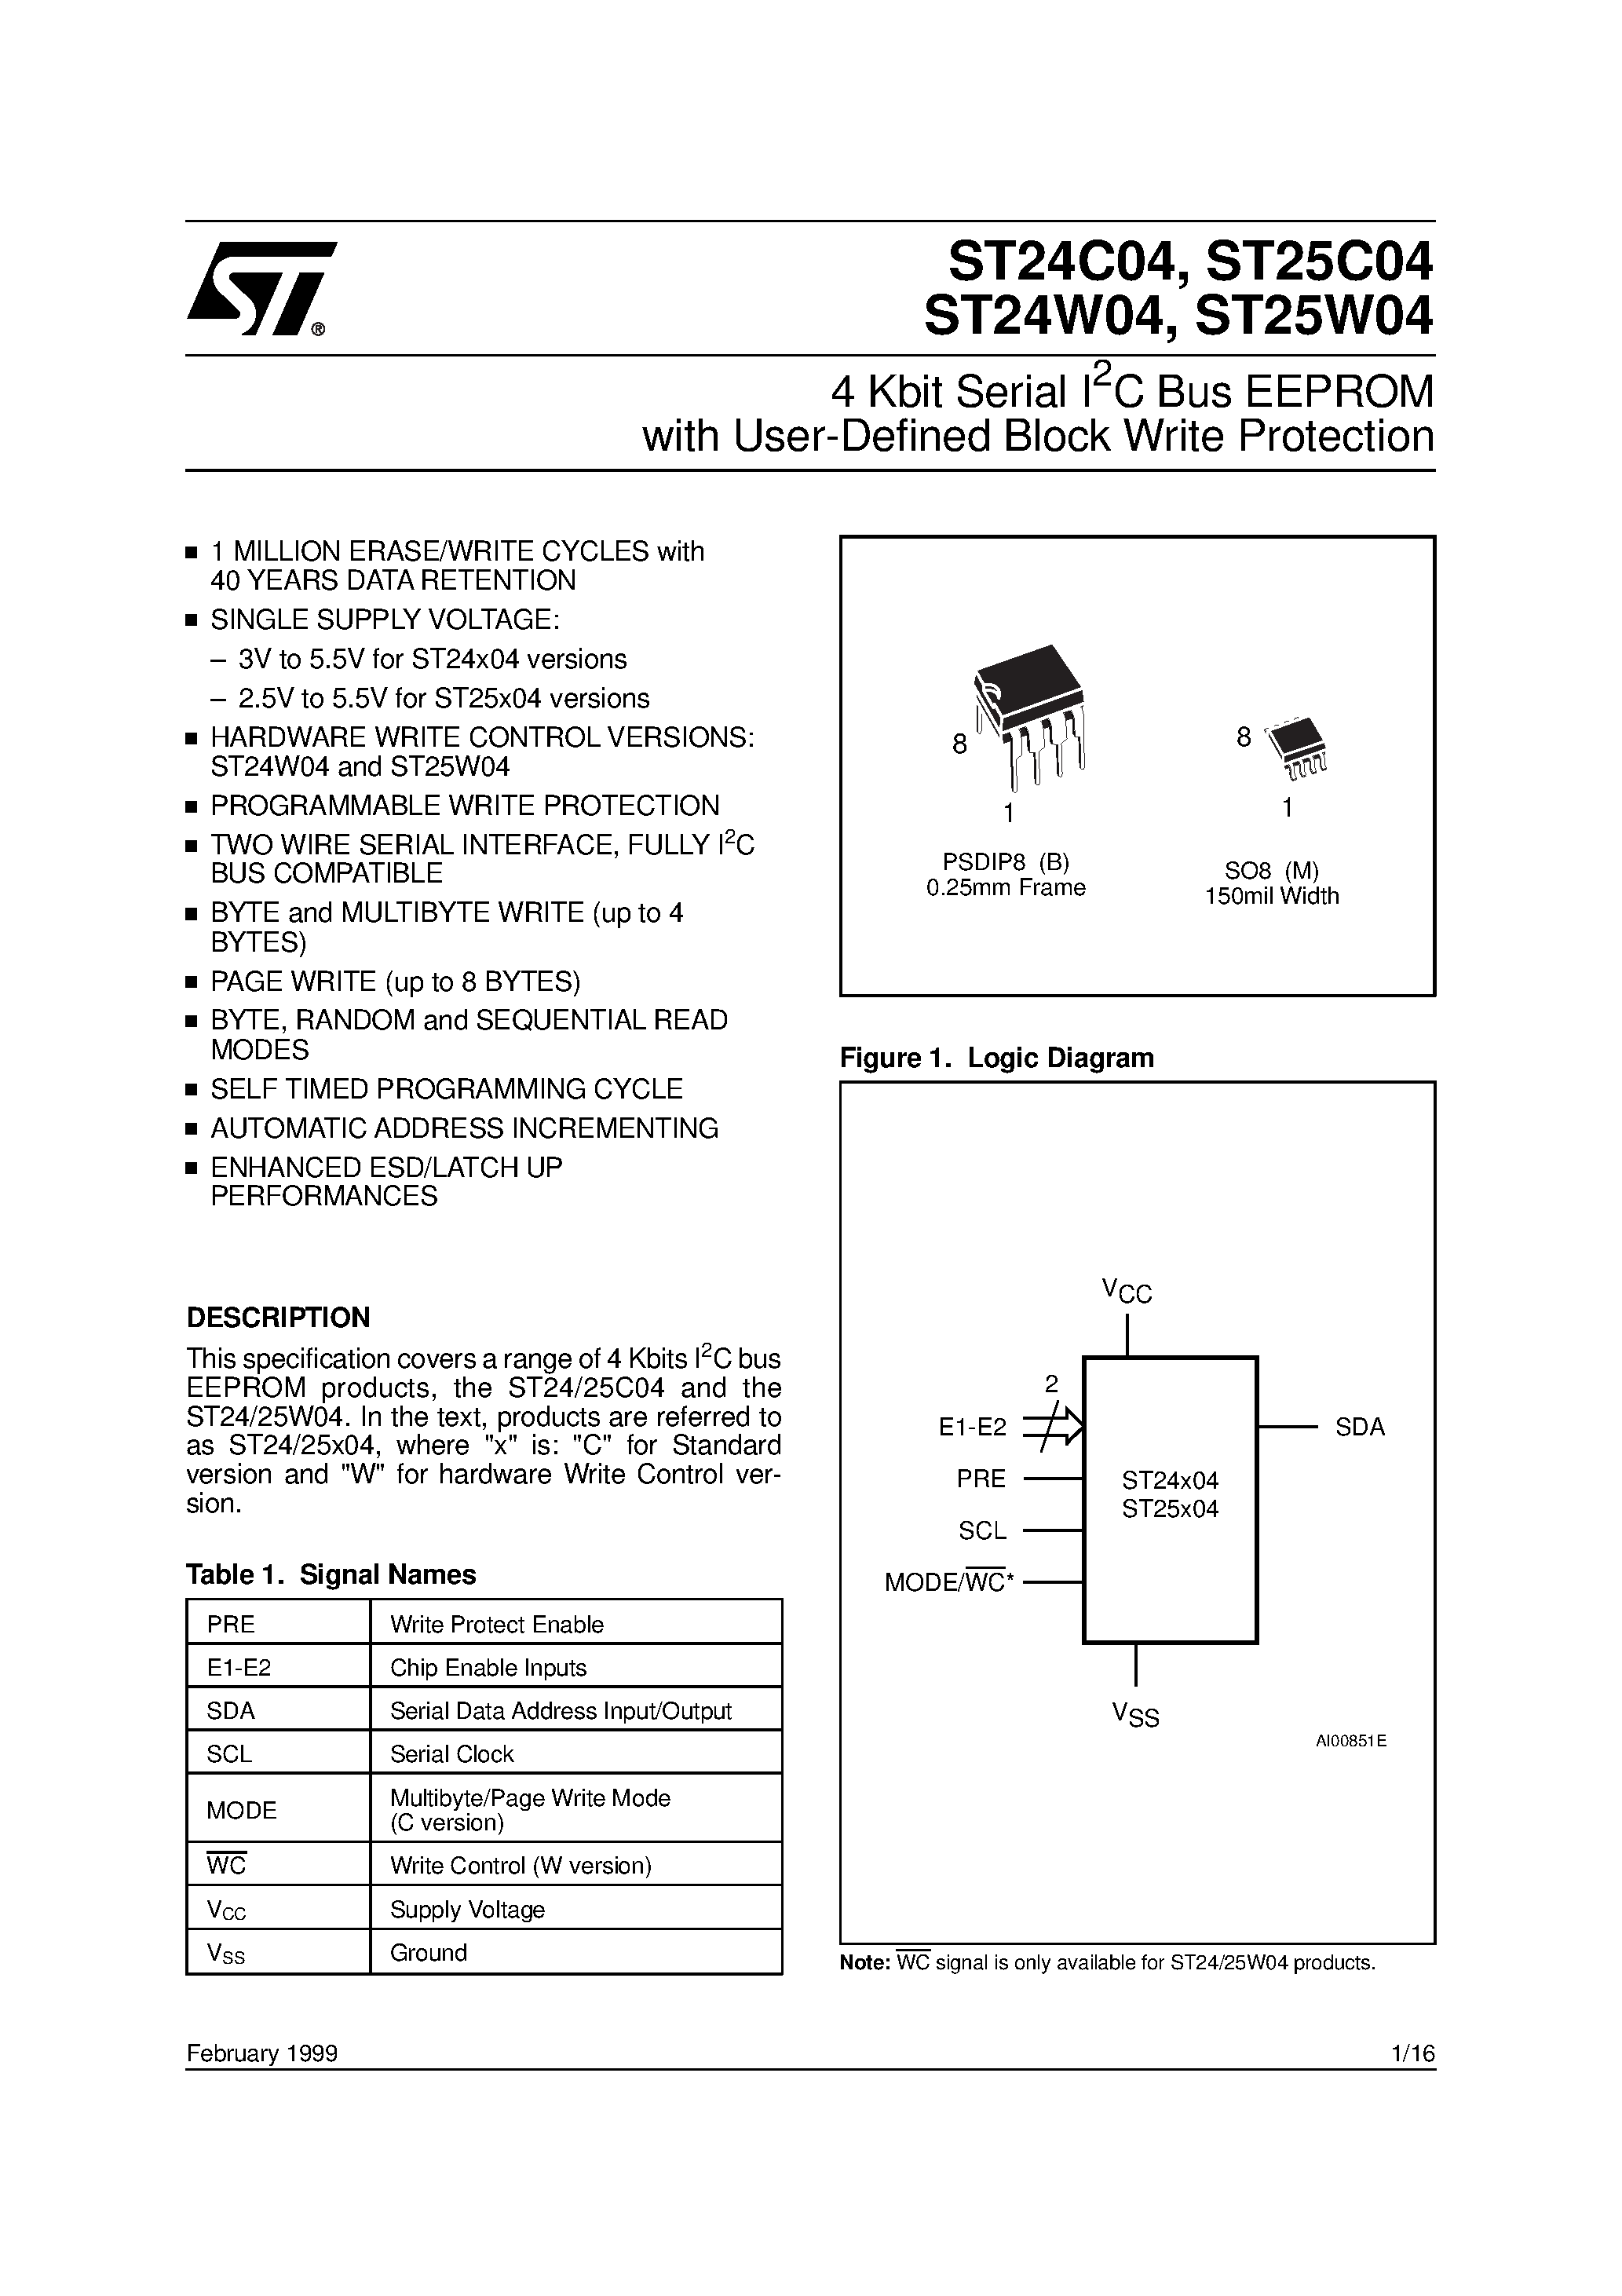 Datasheet ST24C04 - 4 Kbit Serial I2C Bus EEPROM with User-Defined Block Write Protection page 1